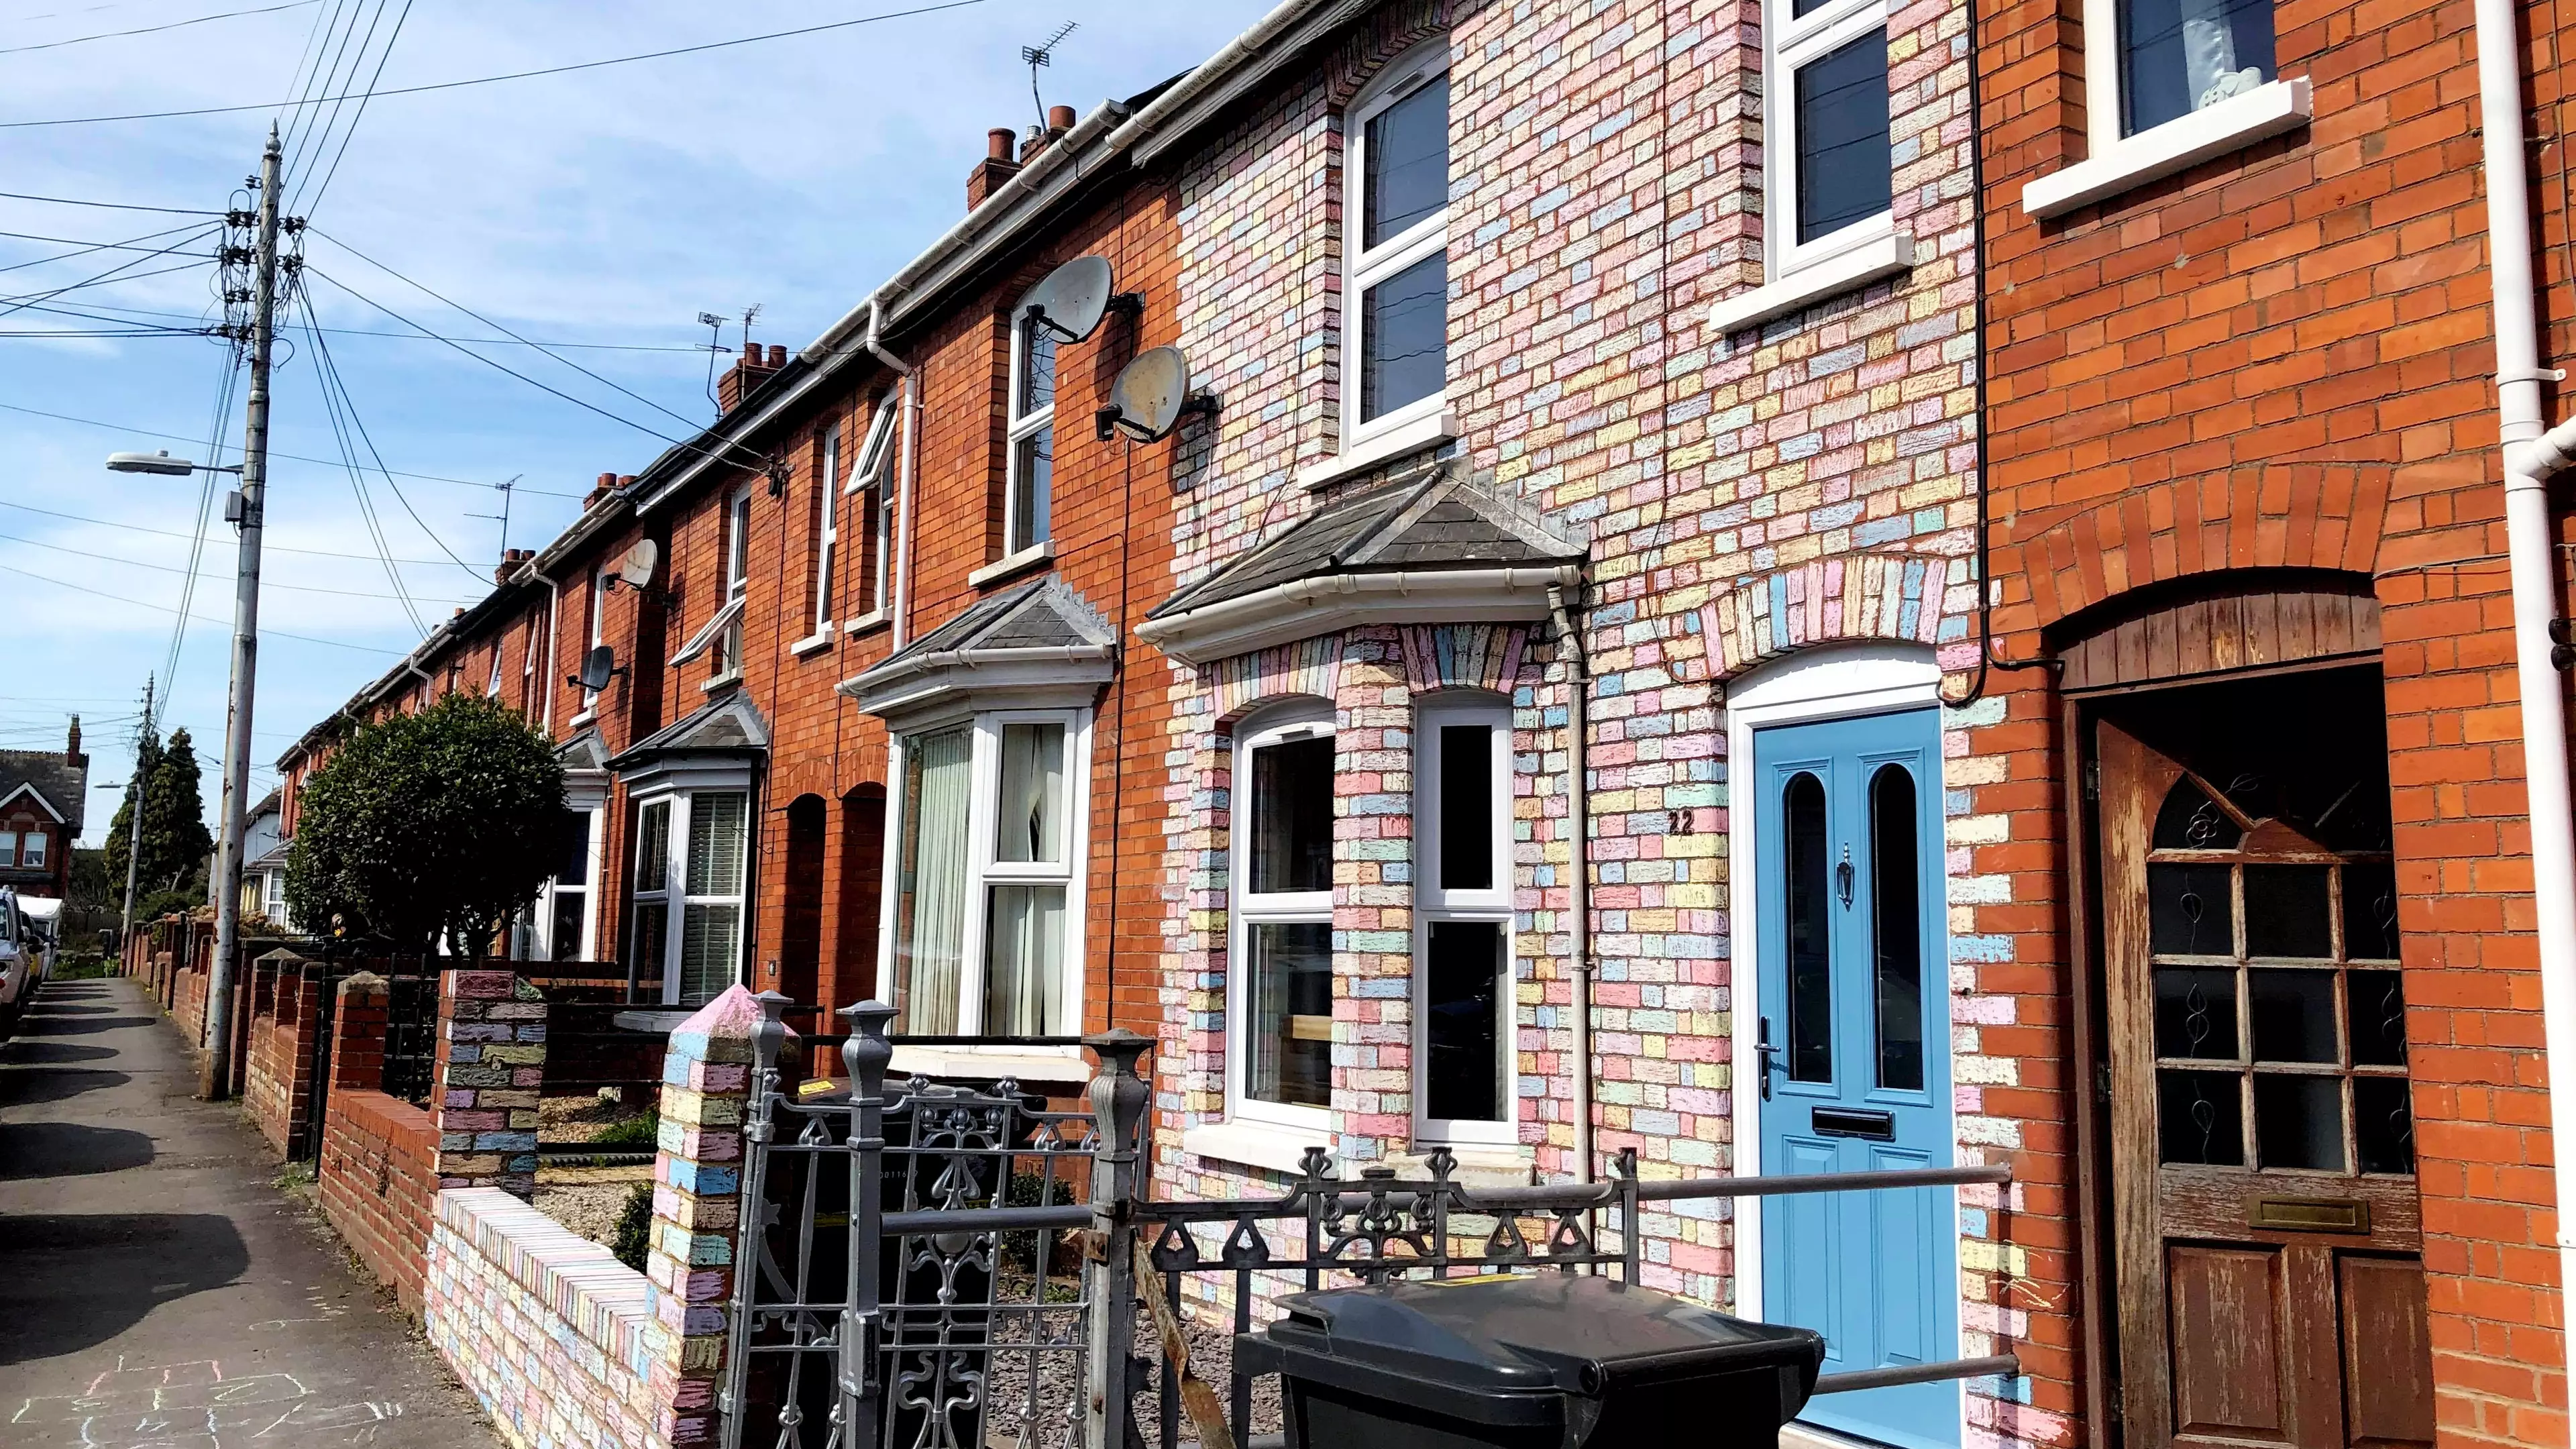 Family Colour Every Brick Of Their House With Chalk To Create A 'Rainbow' Home To Cheer Up Their Neighbours